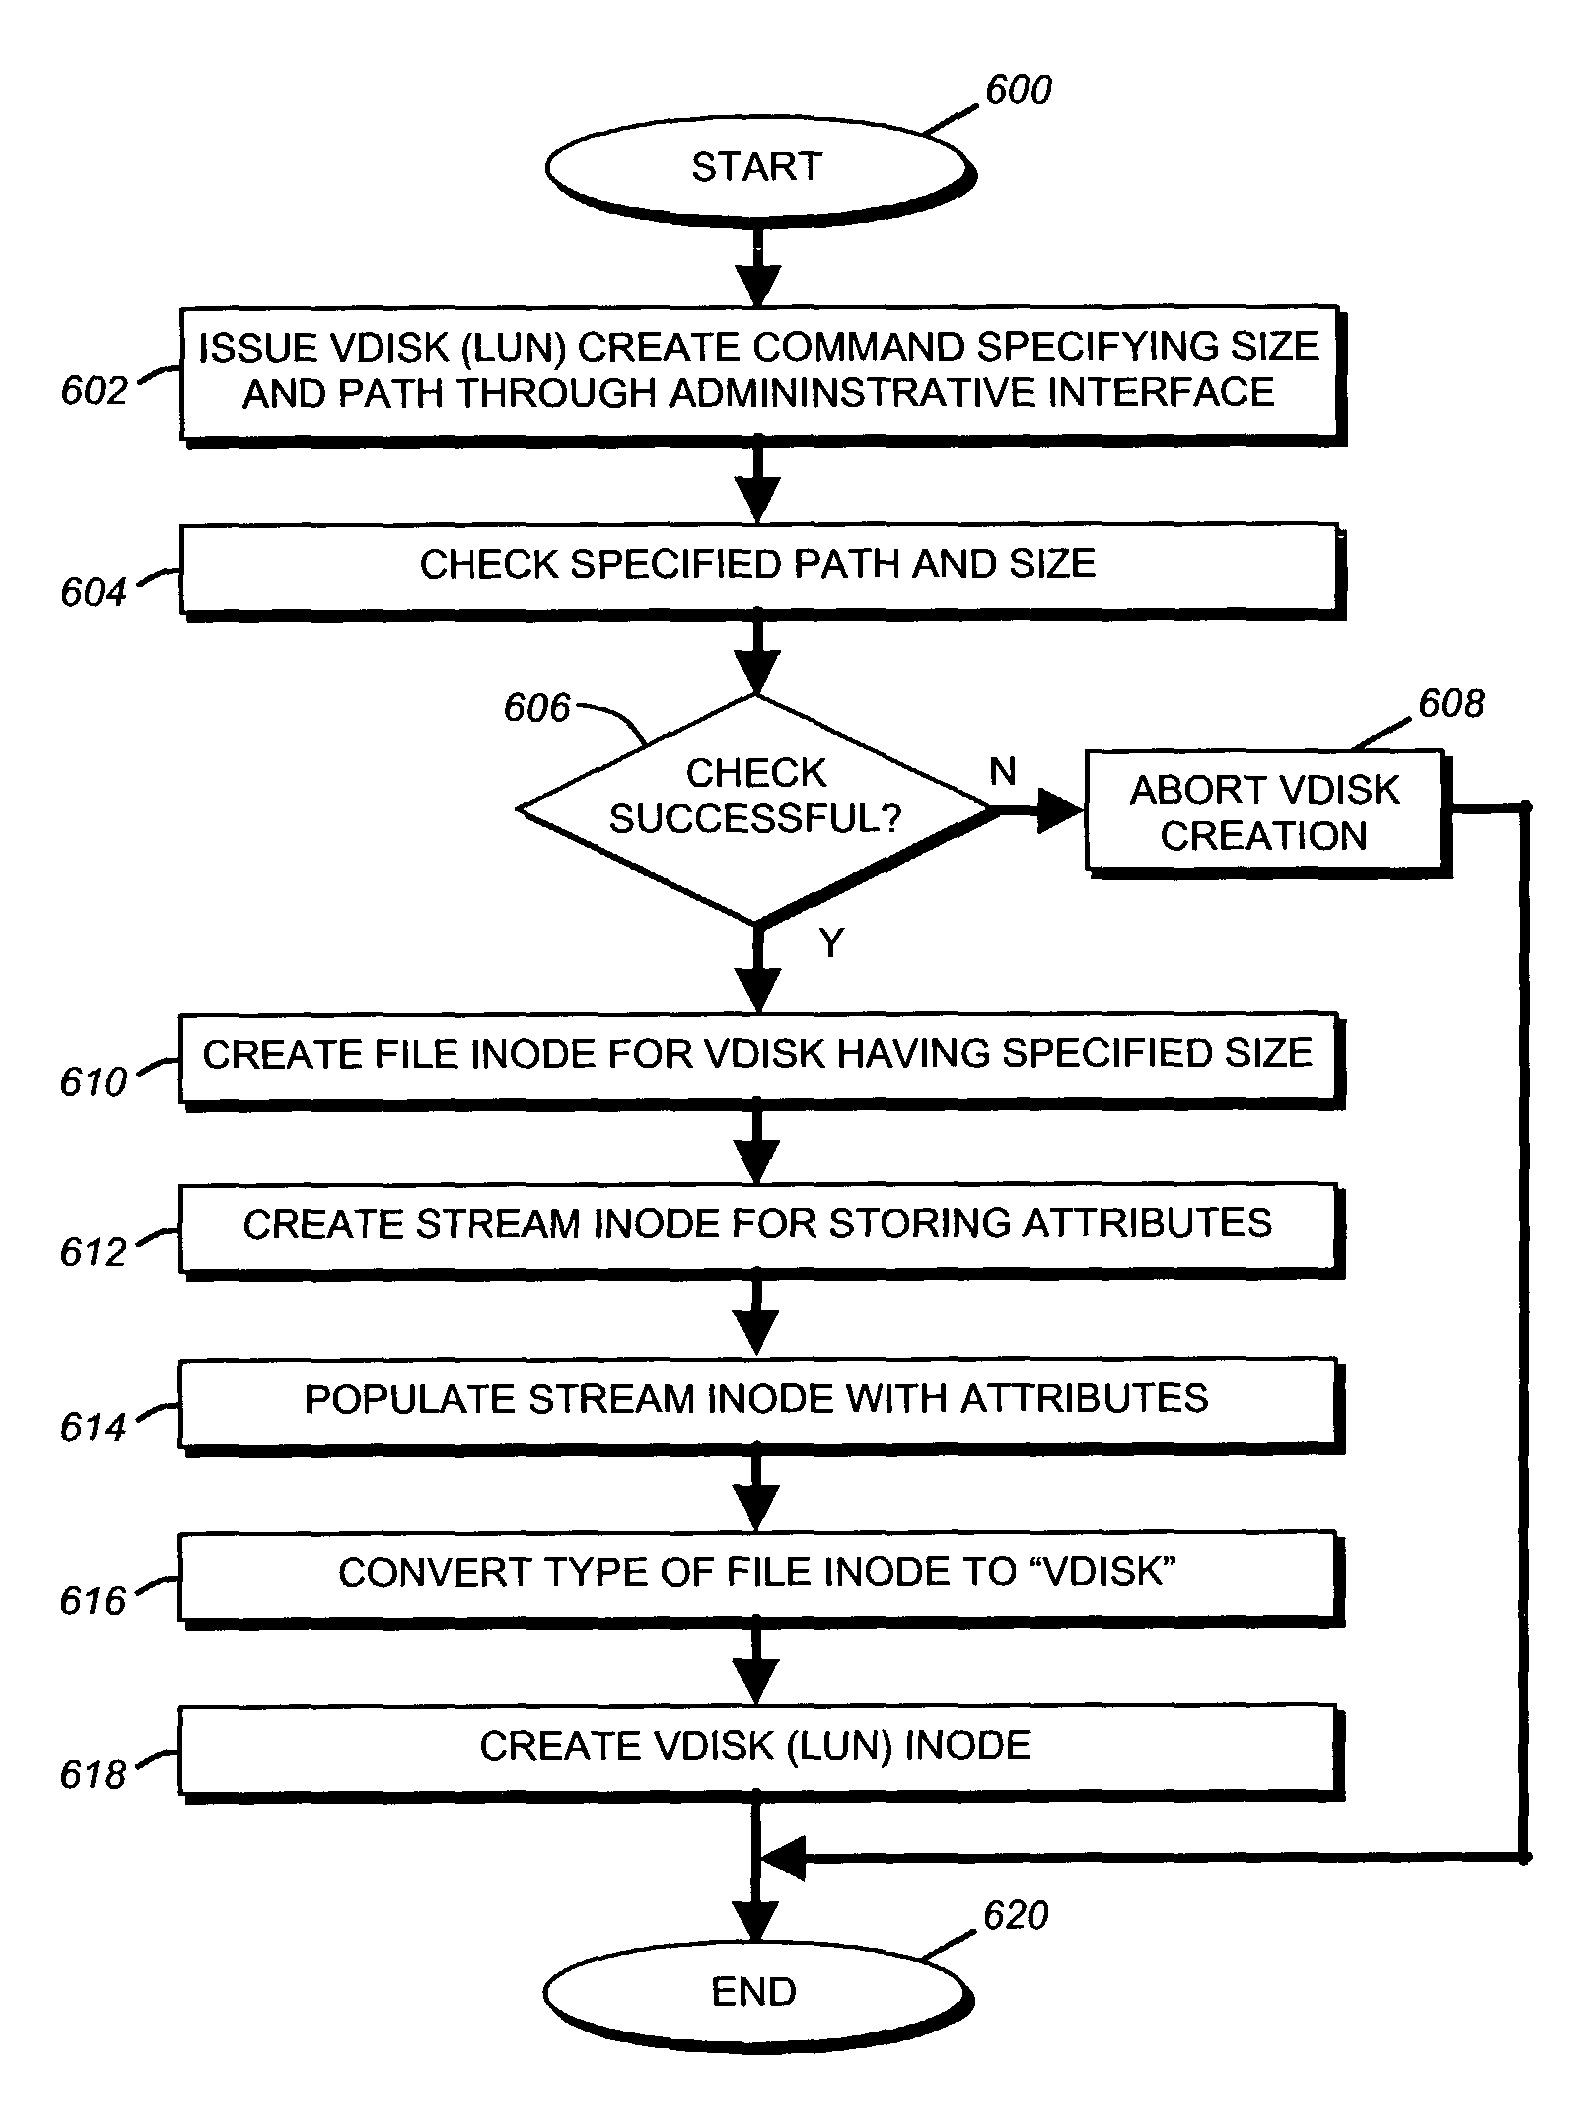 Storage virtualization by layering virtual disk objects on a file system